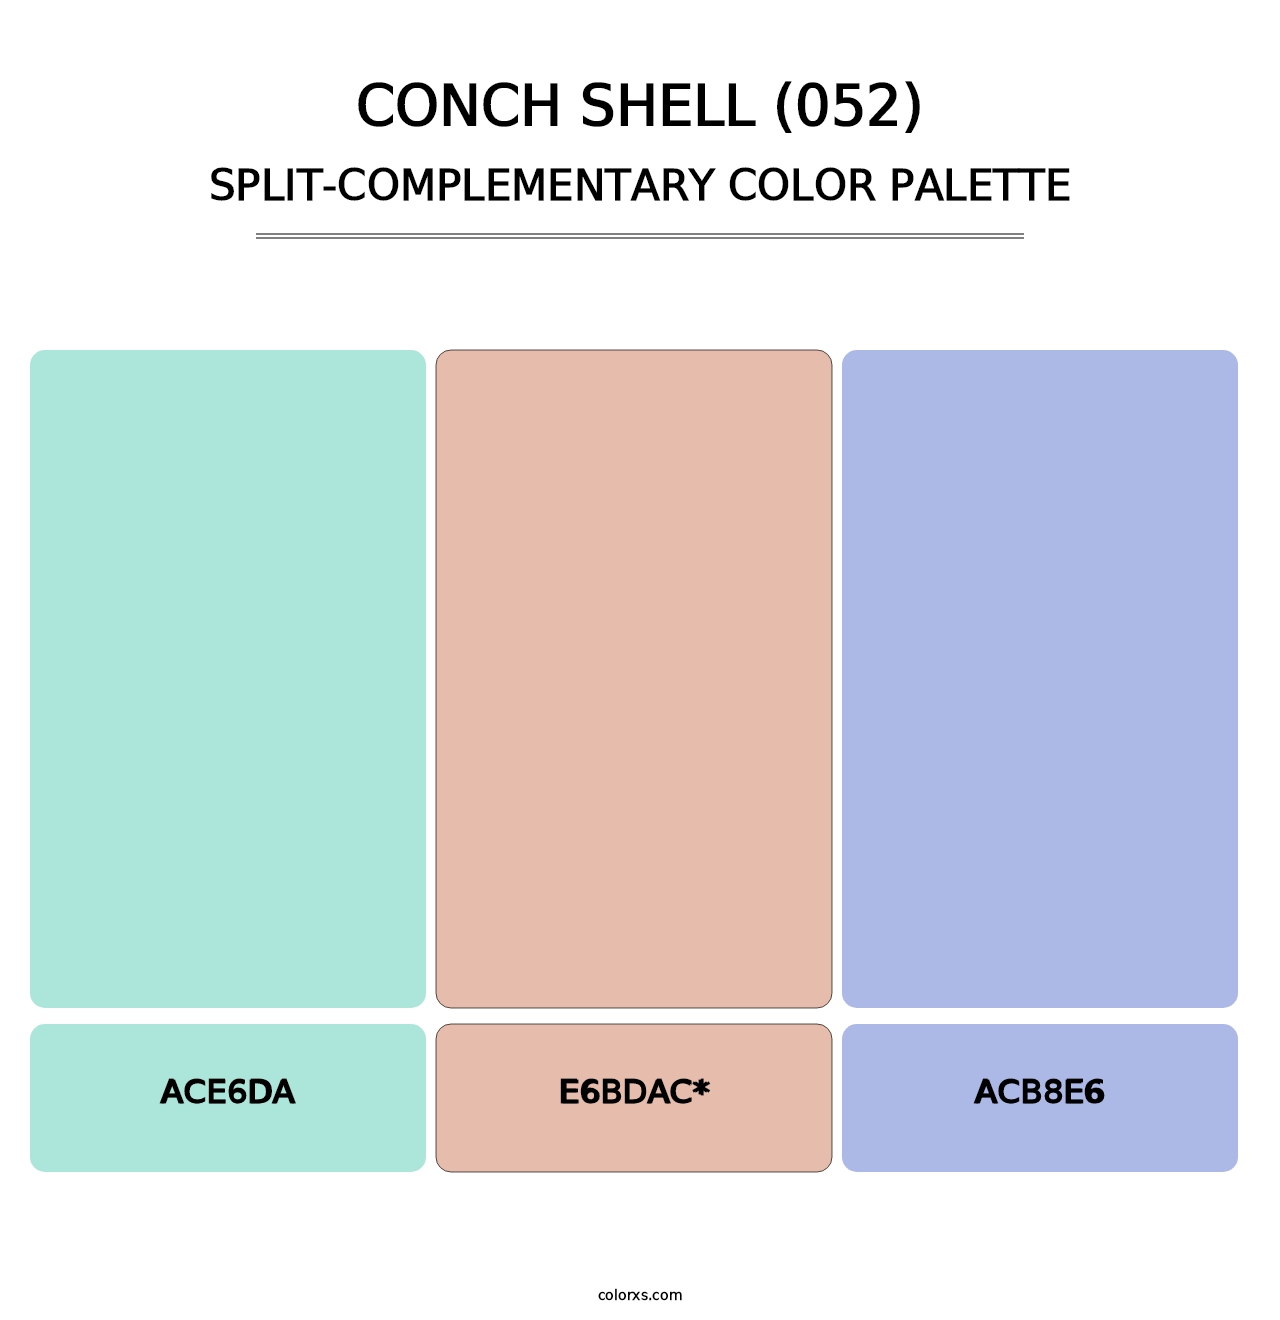 Conch Shell (052) - Split-Complementary Color Palette